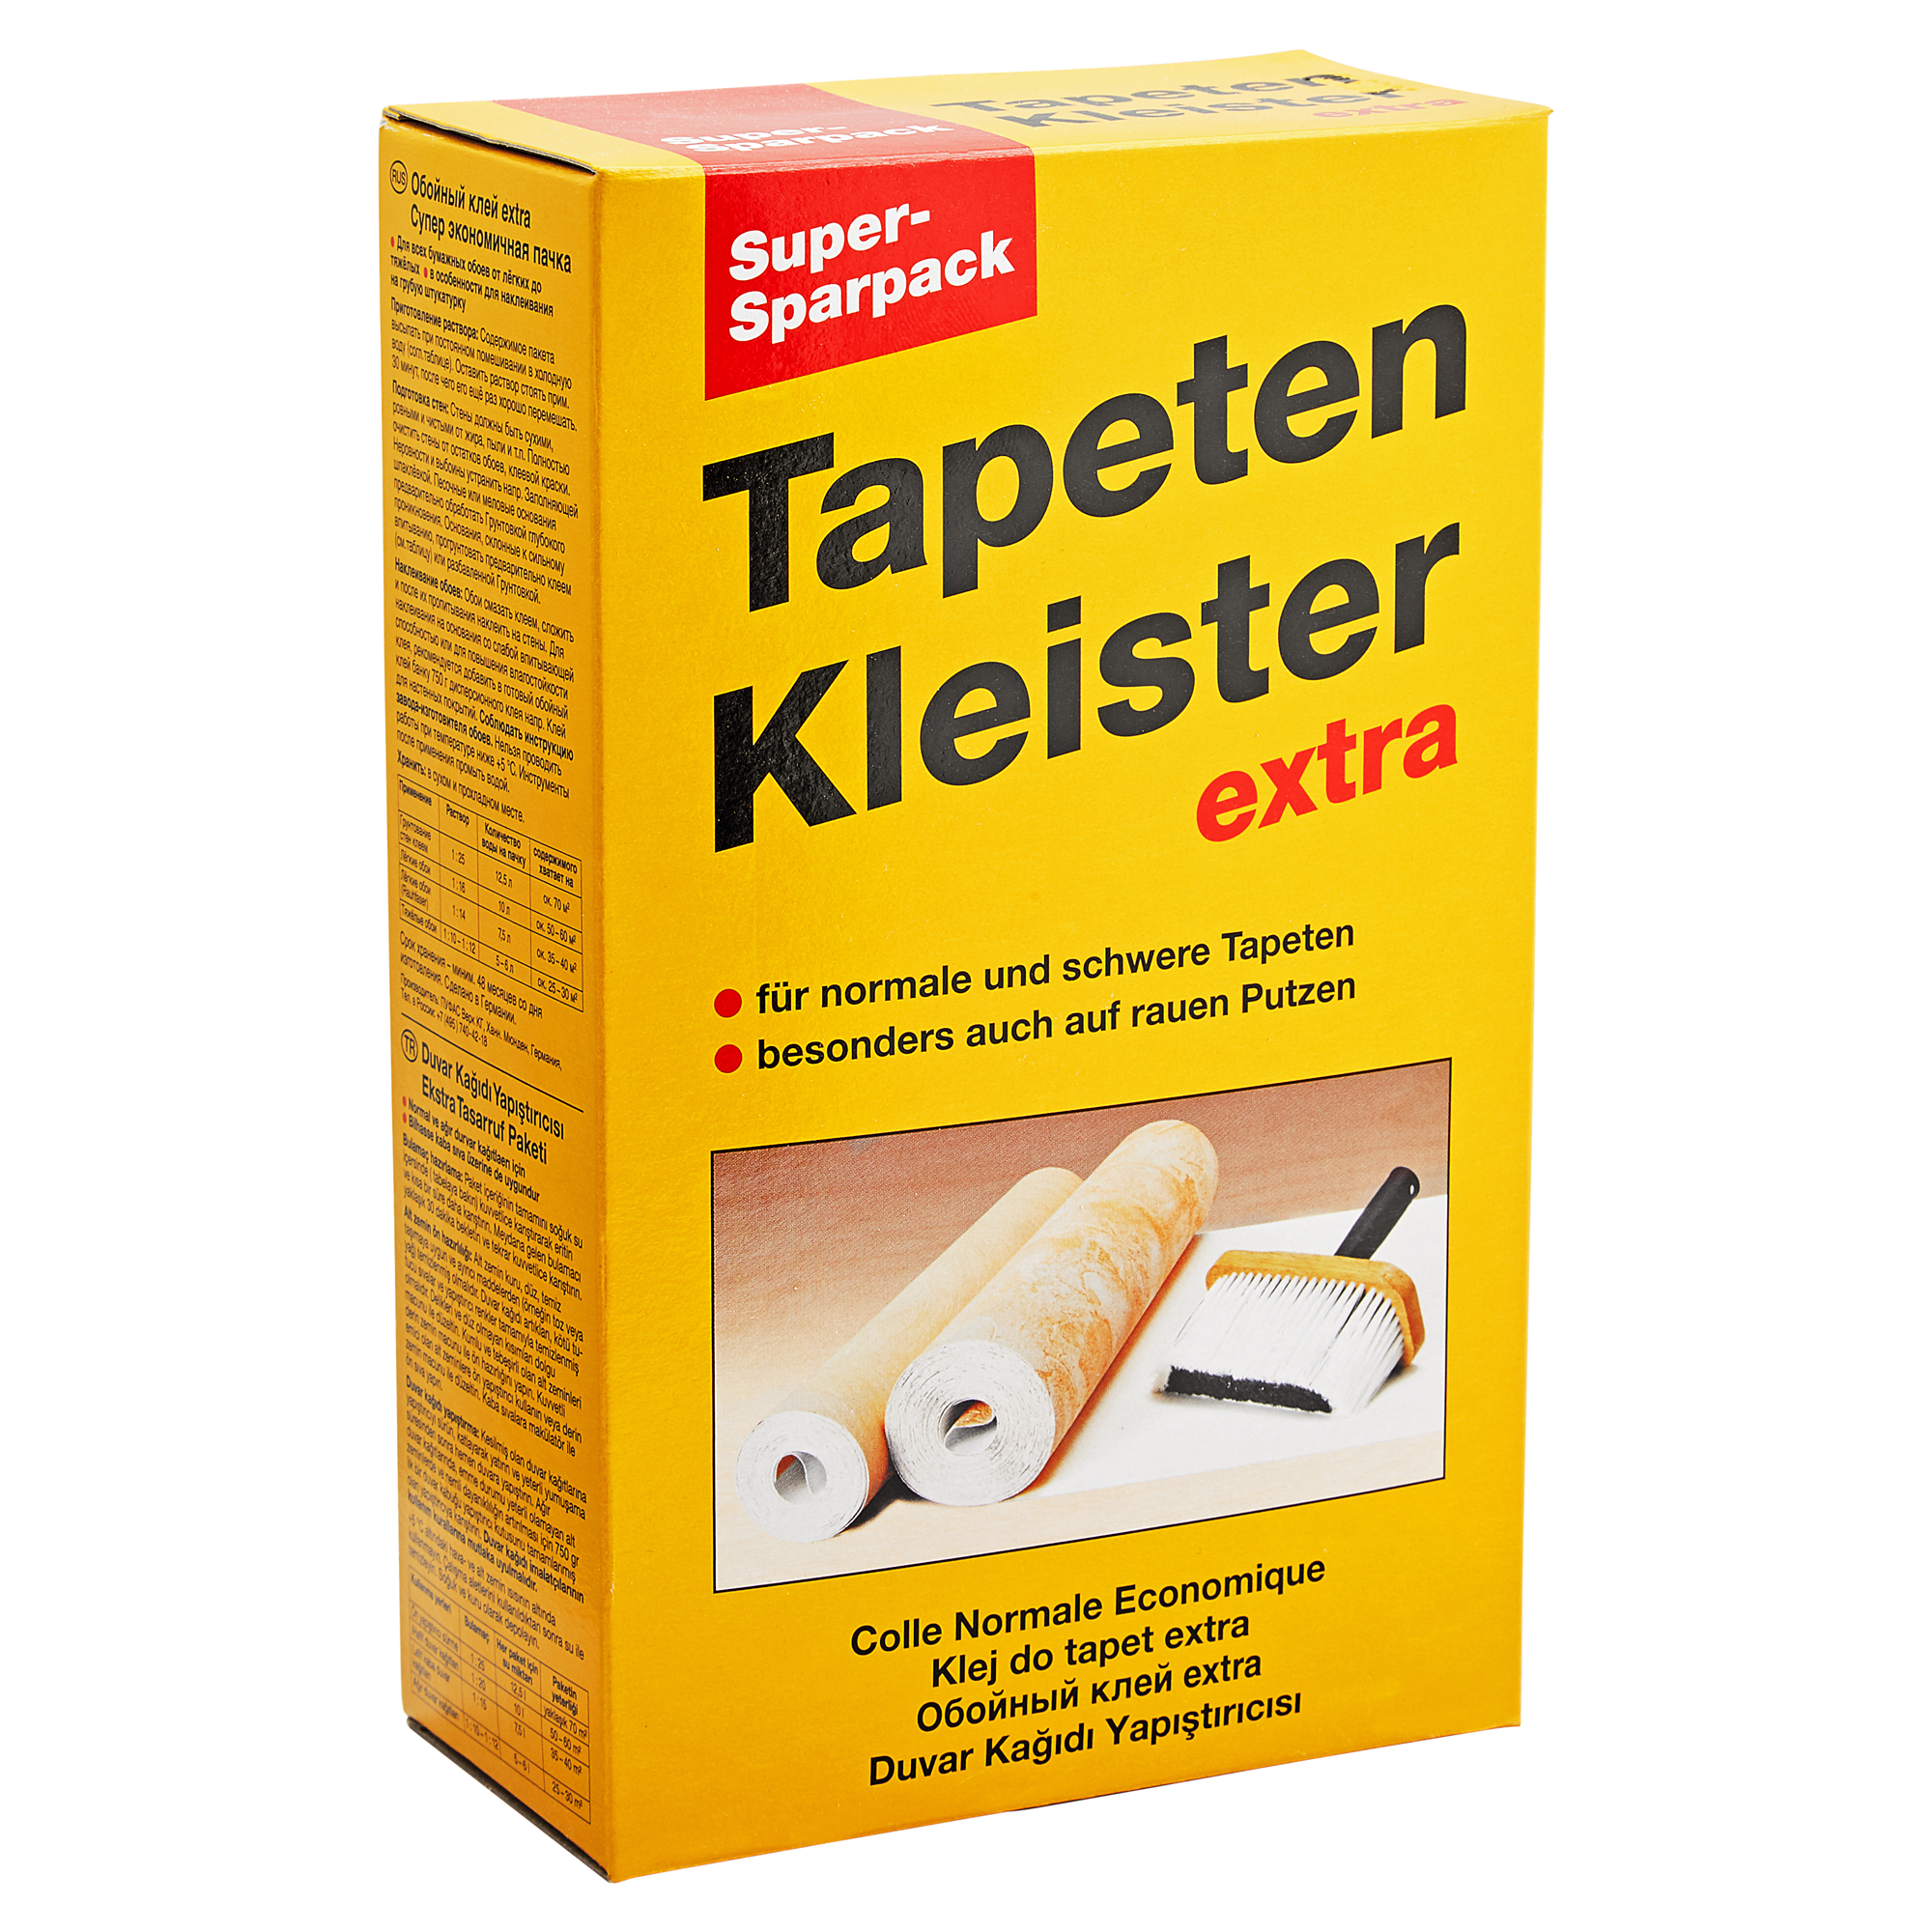 Tapetenkleister 0,5 kg + product picture